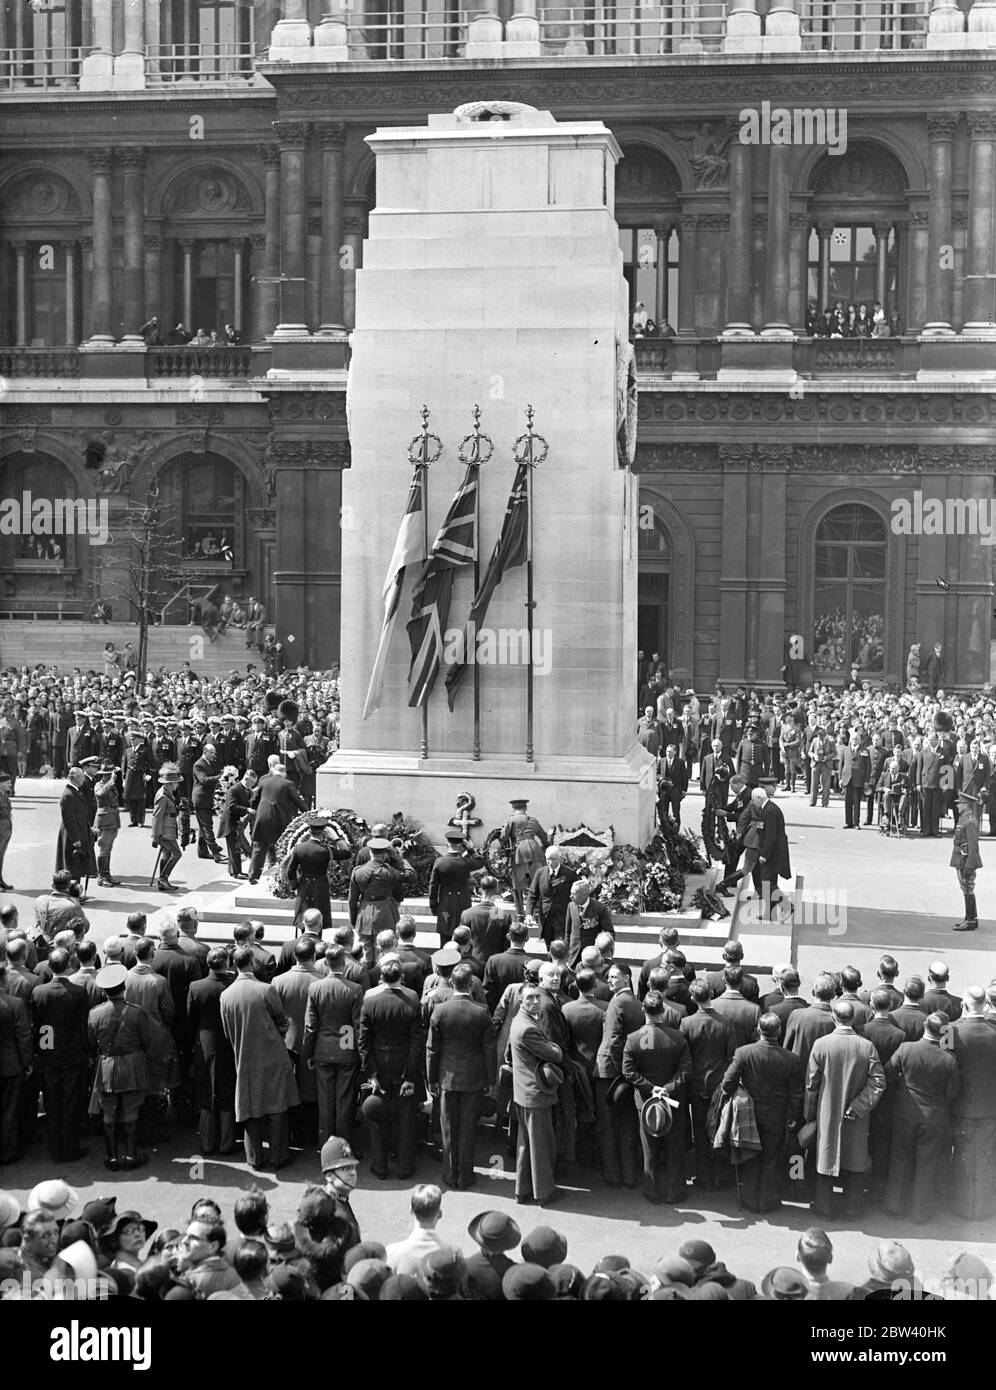 Coronation troops parade for Anzac Day ceremony at Cenotaph. Members of the Coronation contingent, who are in London for the Coronation, paraded at at Cenotaph after attending the Anzac Day at Saint Pauls Cathedral. [Australian and New Zealand Army Corps] Photo shows: the scene at the Cenotaph during the Anzac Day parade. 25 April 1937 Stock Photo